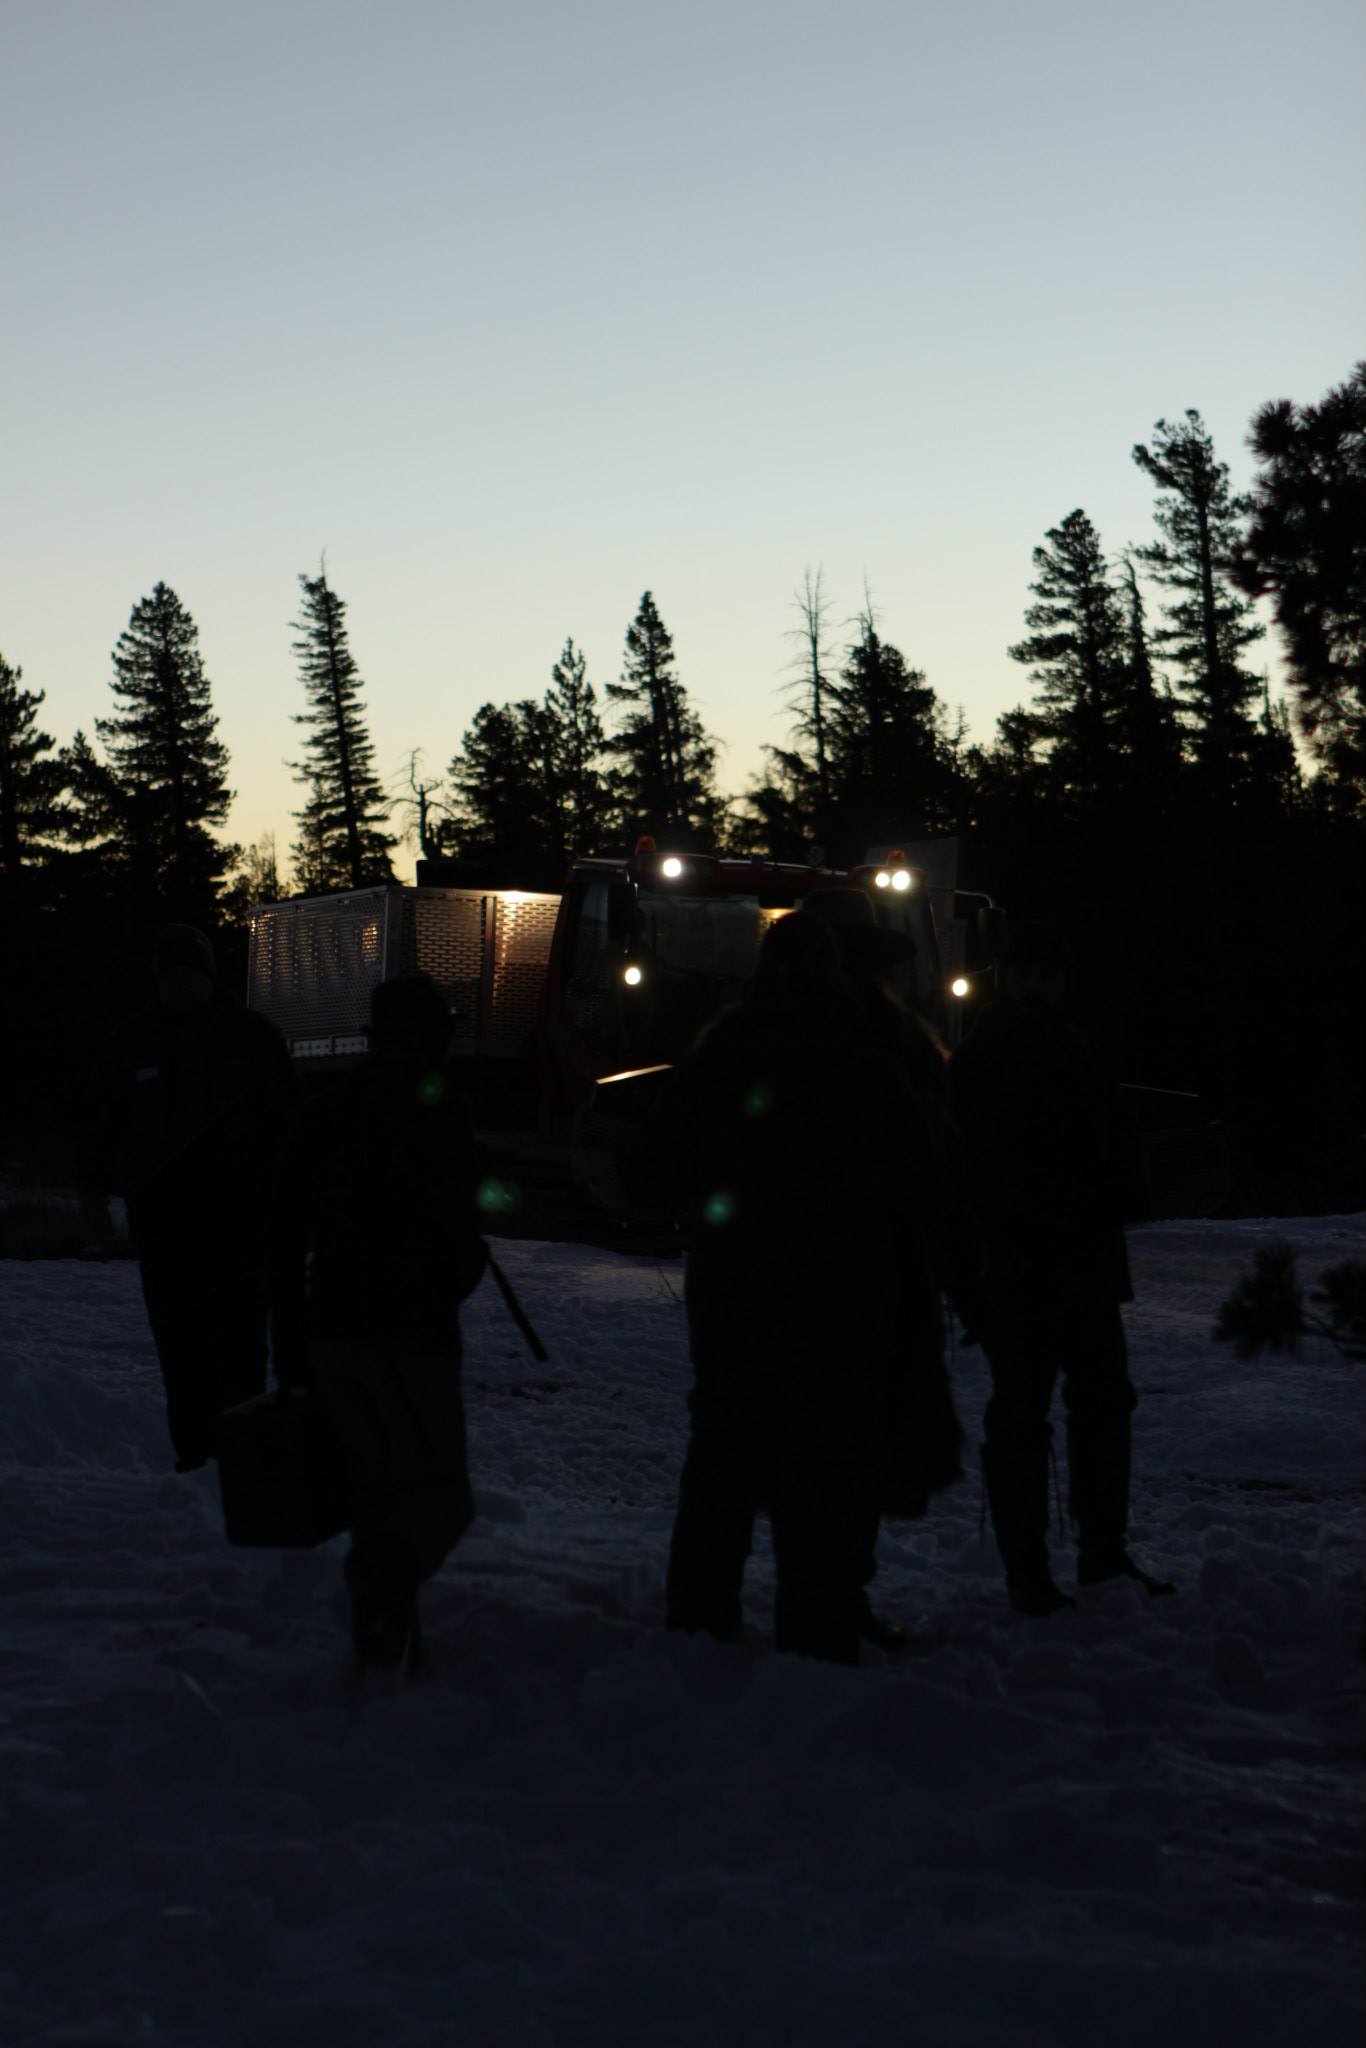 On Location - Scene One Filming, What Child Is This 1-24-15, sunrise at Ansel Adams Wilderness Area-MMSA Moving Us to Location, Early AM